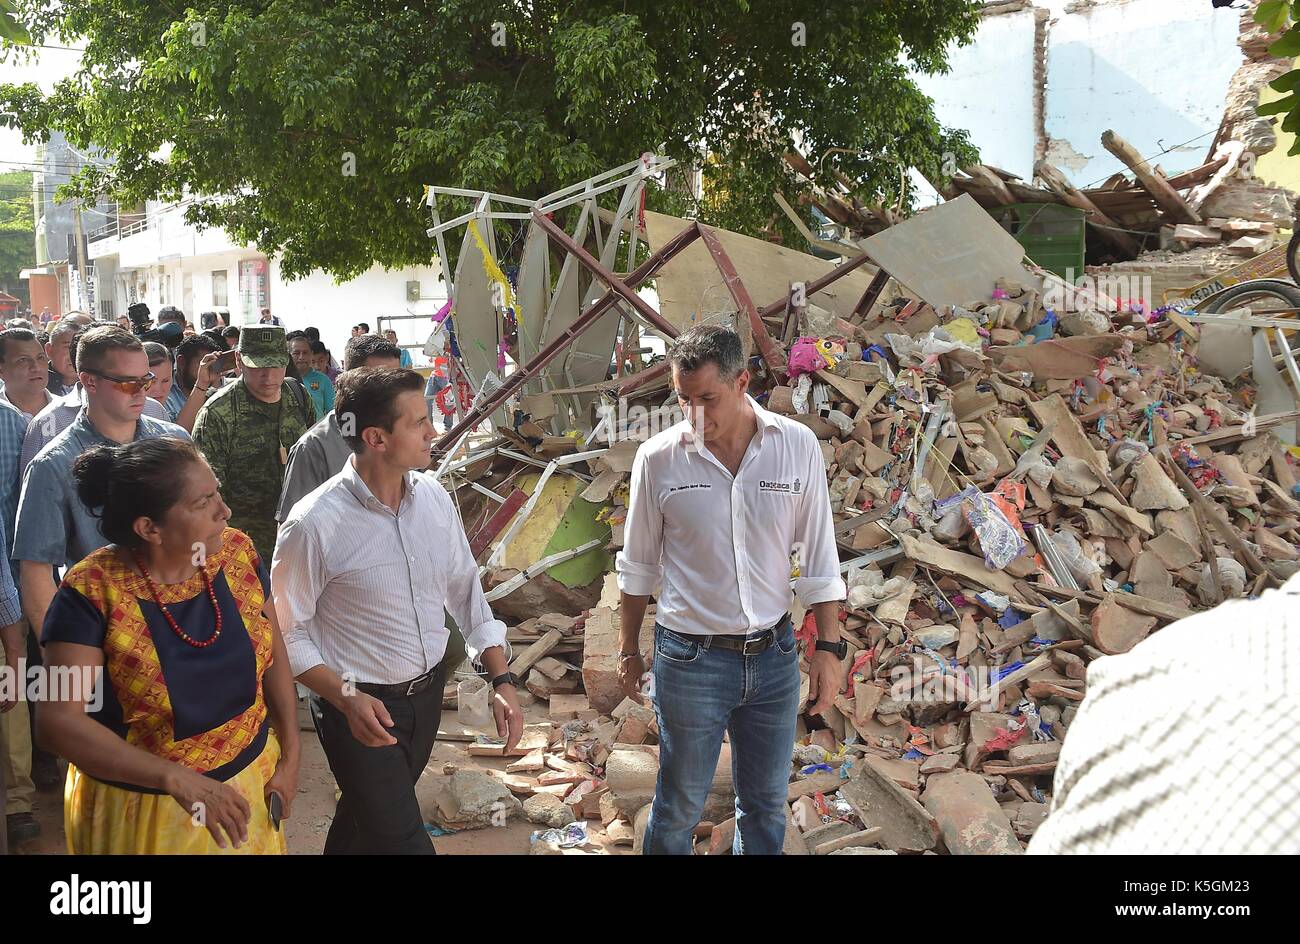 Oaxaca, Mexico. 09th Sep, 2017. Mexican President Enrique Pena Nieto views earthquake damage during a visit to the coastal town closest to the epicenter September 9, 2017 in Juchitán, Oaxaca, Mexico. The massive 8.2-magnitude quake struck off the southern Pacific coast of Chiapas killing at least 60 people and leveling areas in some southern states. (presidenciamx via Planetpix) Credit: Planetpix/Alamy Live News Stock Photo